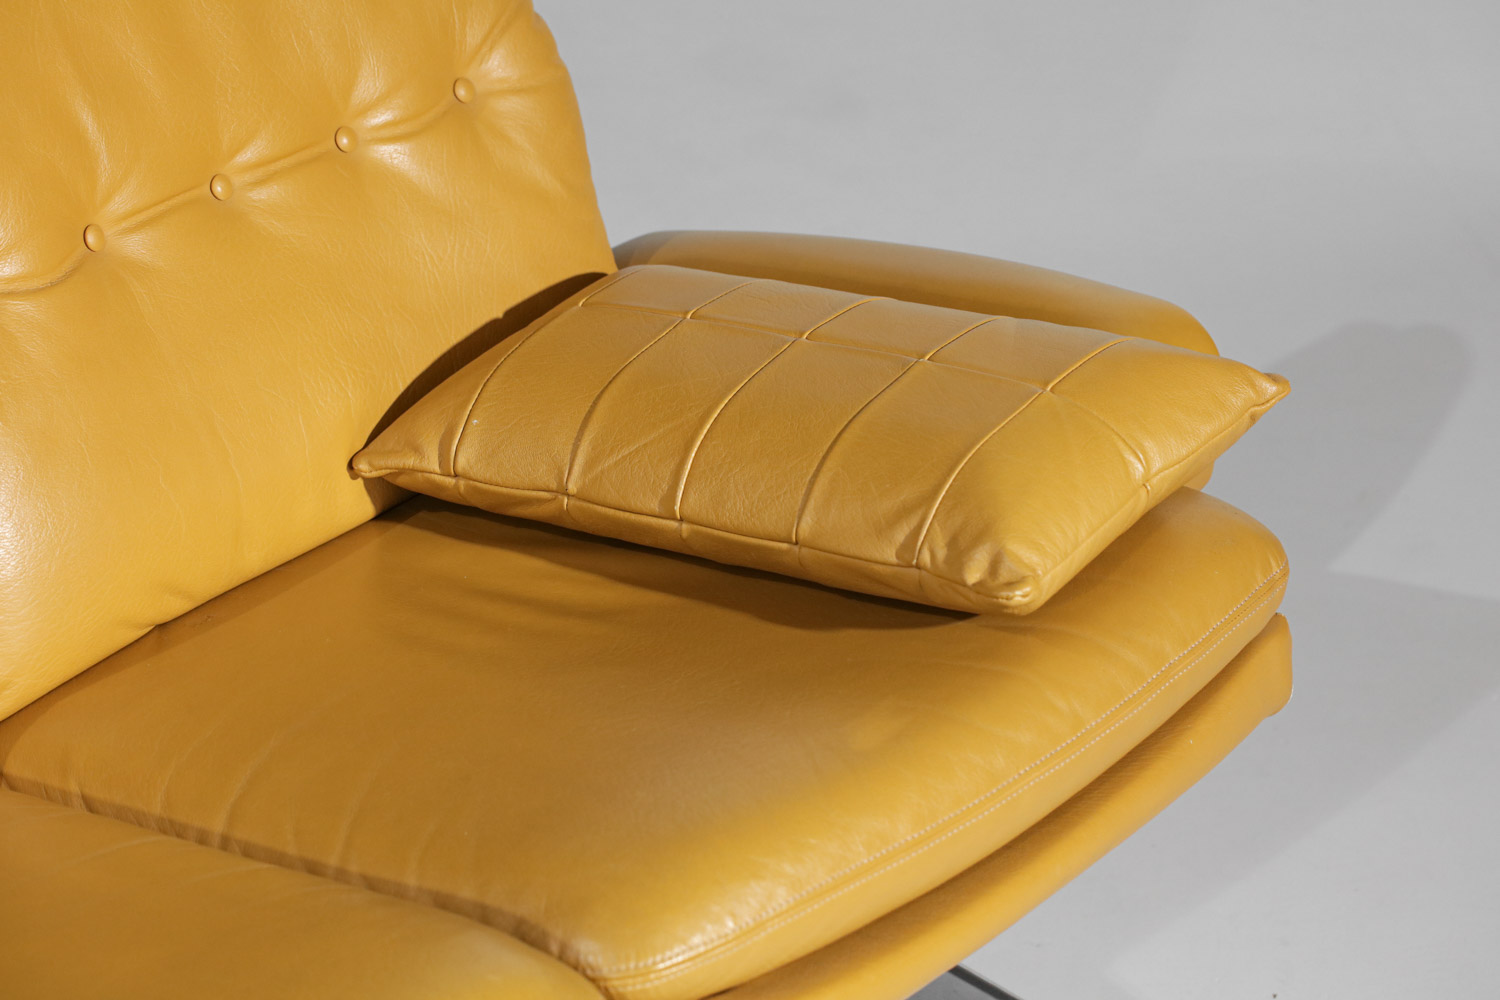 Canapé cuir jaune style Charles et Ray Eames - sofa banquette germany - H06